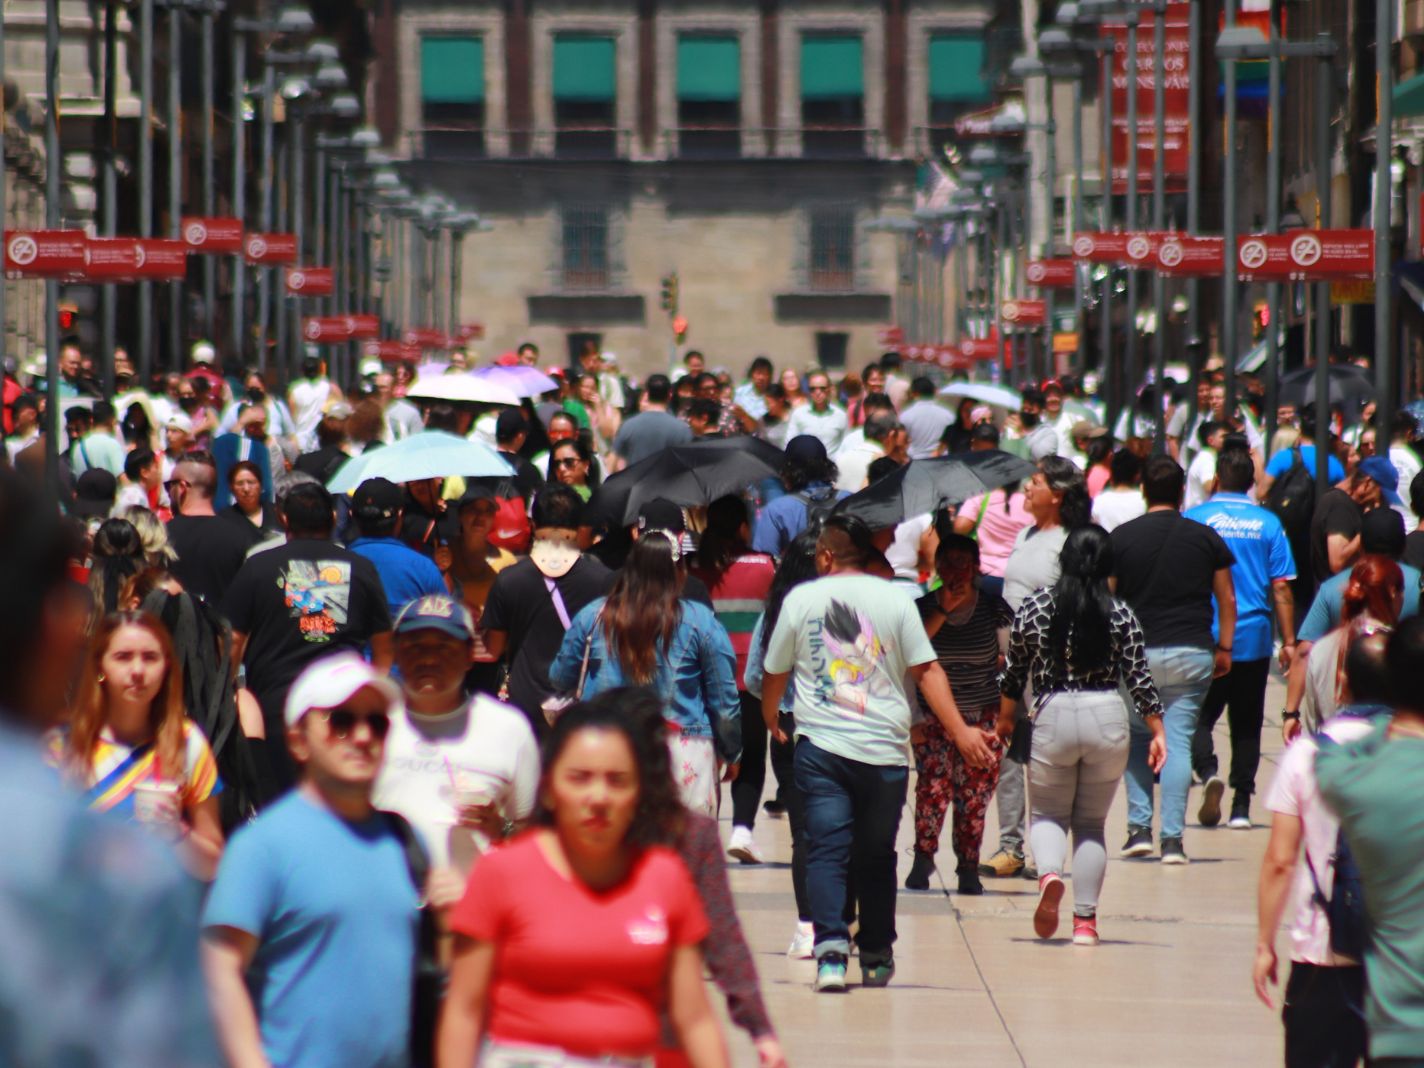 Death Rate Increases As Mexico Experiences Extreme Heat Wave